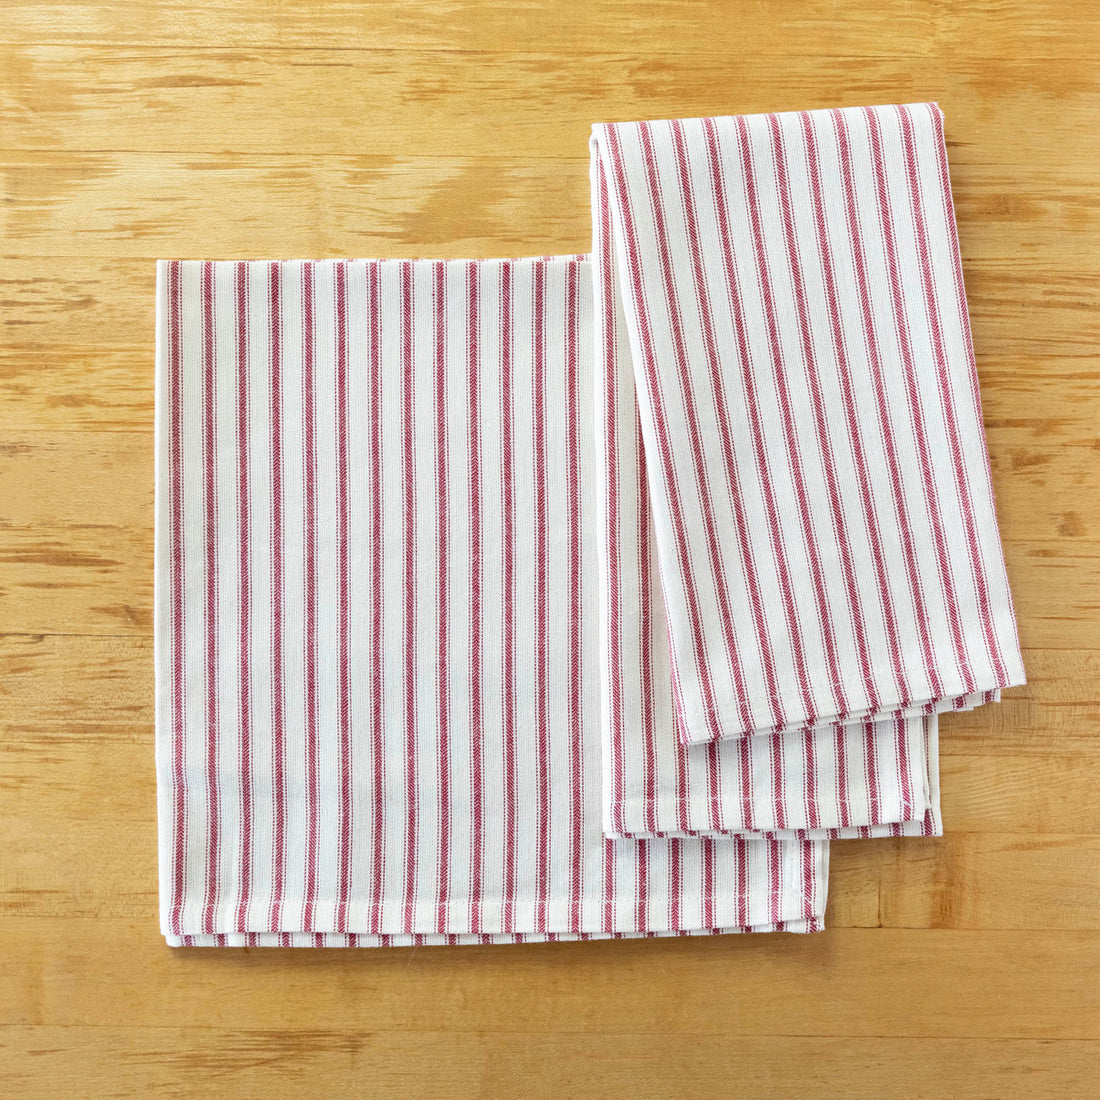 A Taylor Linen Bergen Red Napkin folded on a marble surface for everyday use.